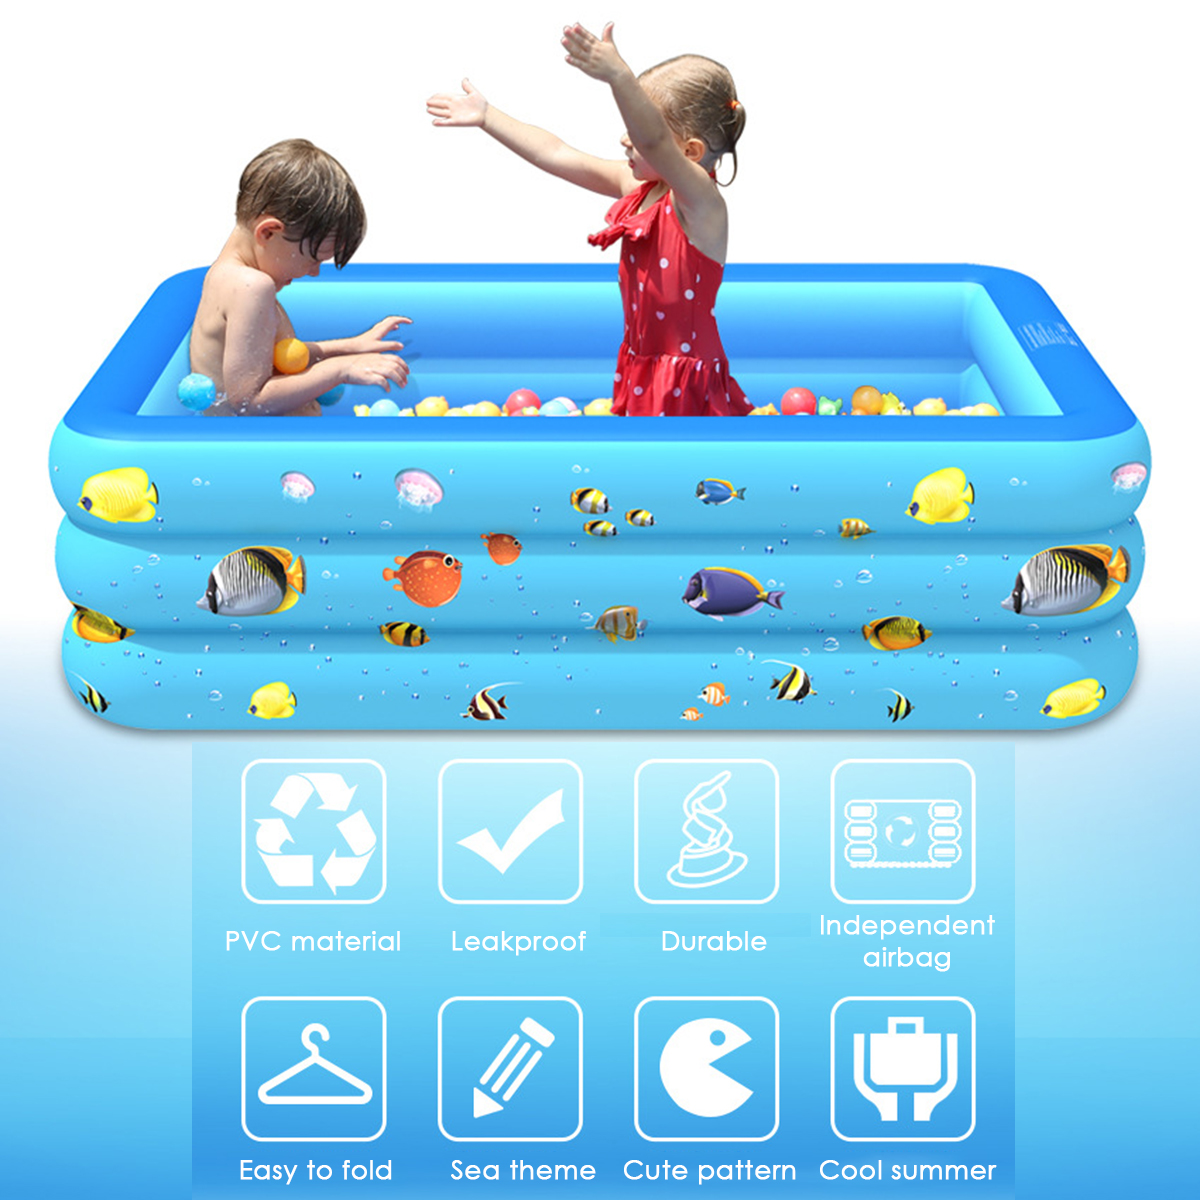 Inflatable-Swimming-Pool-Yard-Garden-Family-Kids-Play-Backyard-Blow-Up-Paddling-Pool-Bathing-Tub-Out-1689353-2